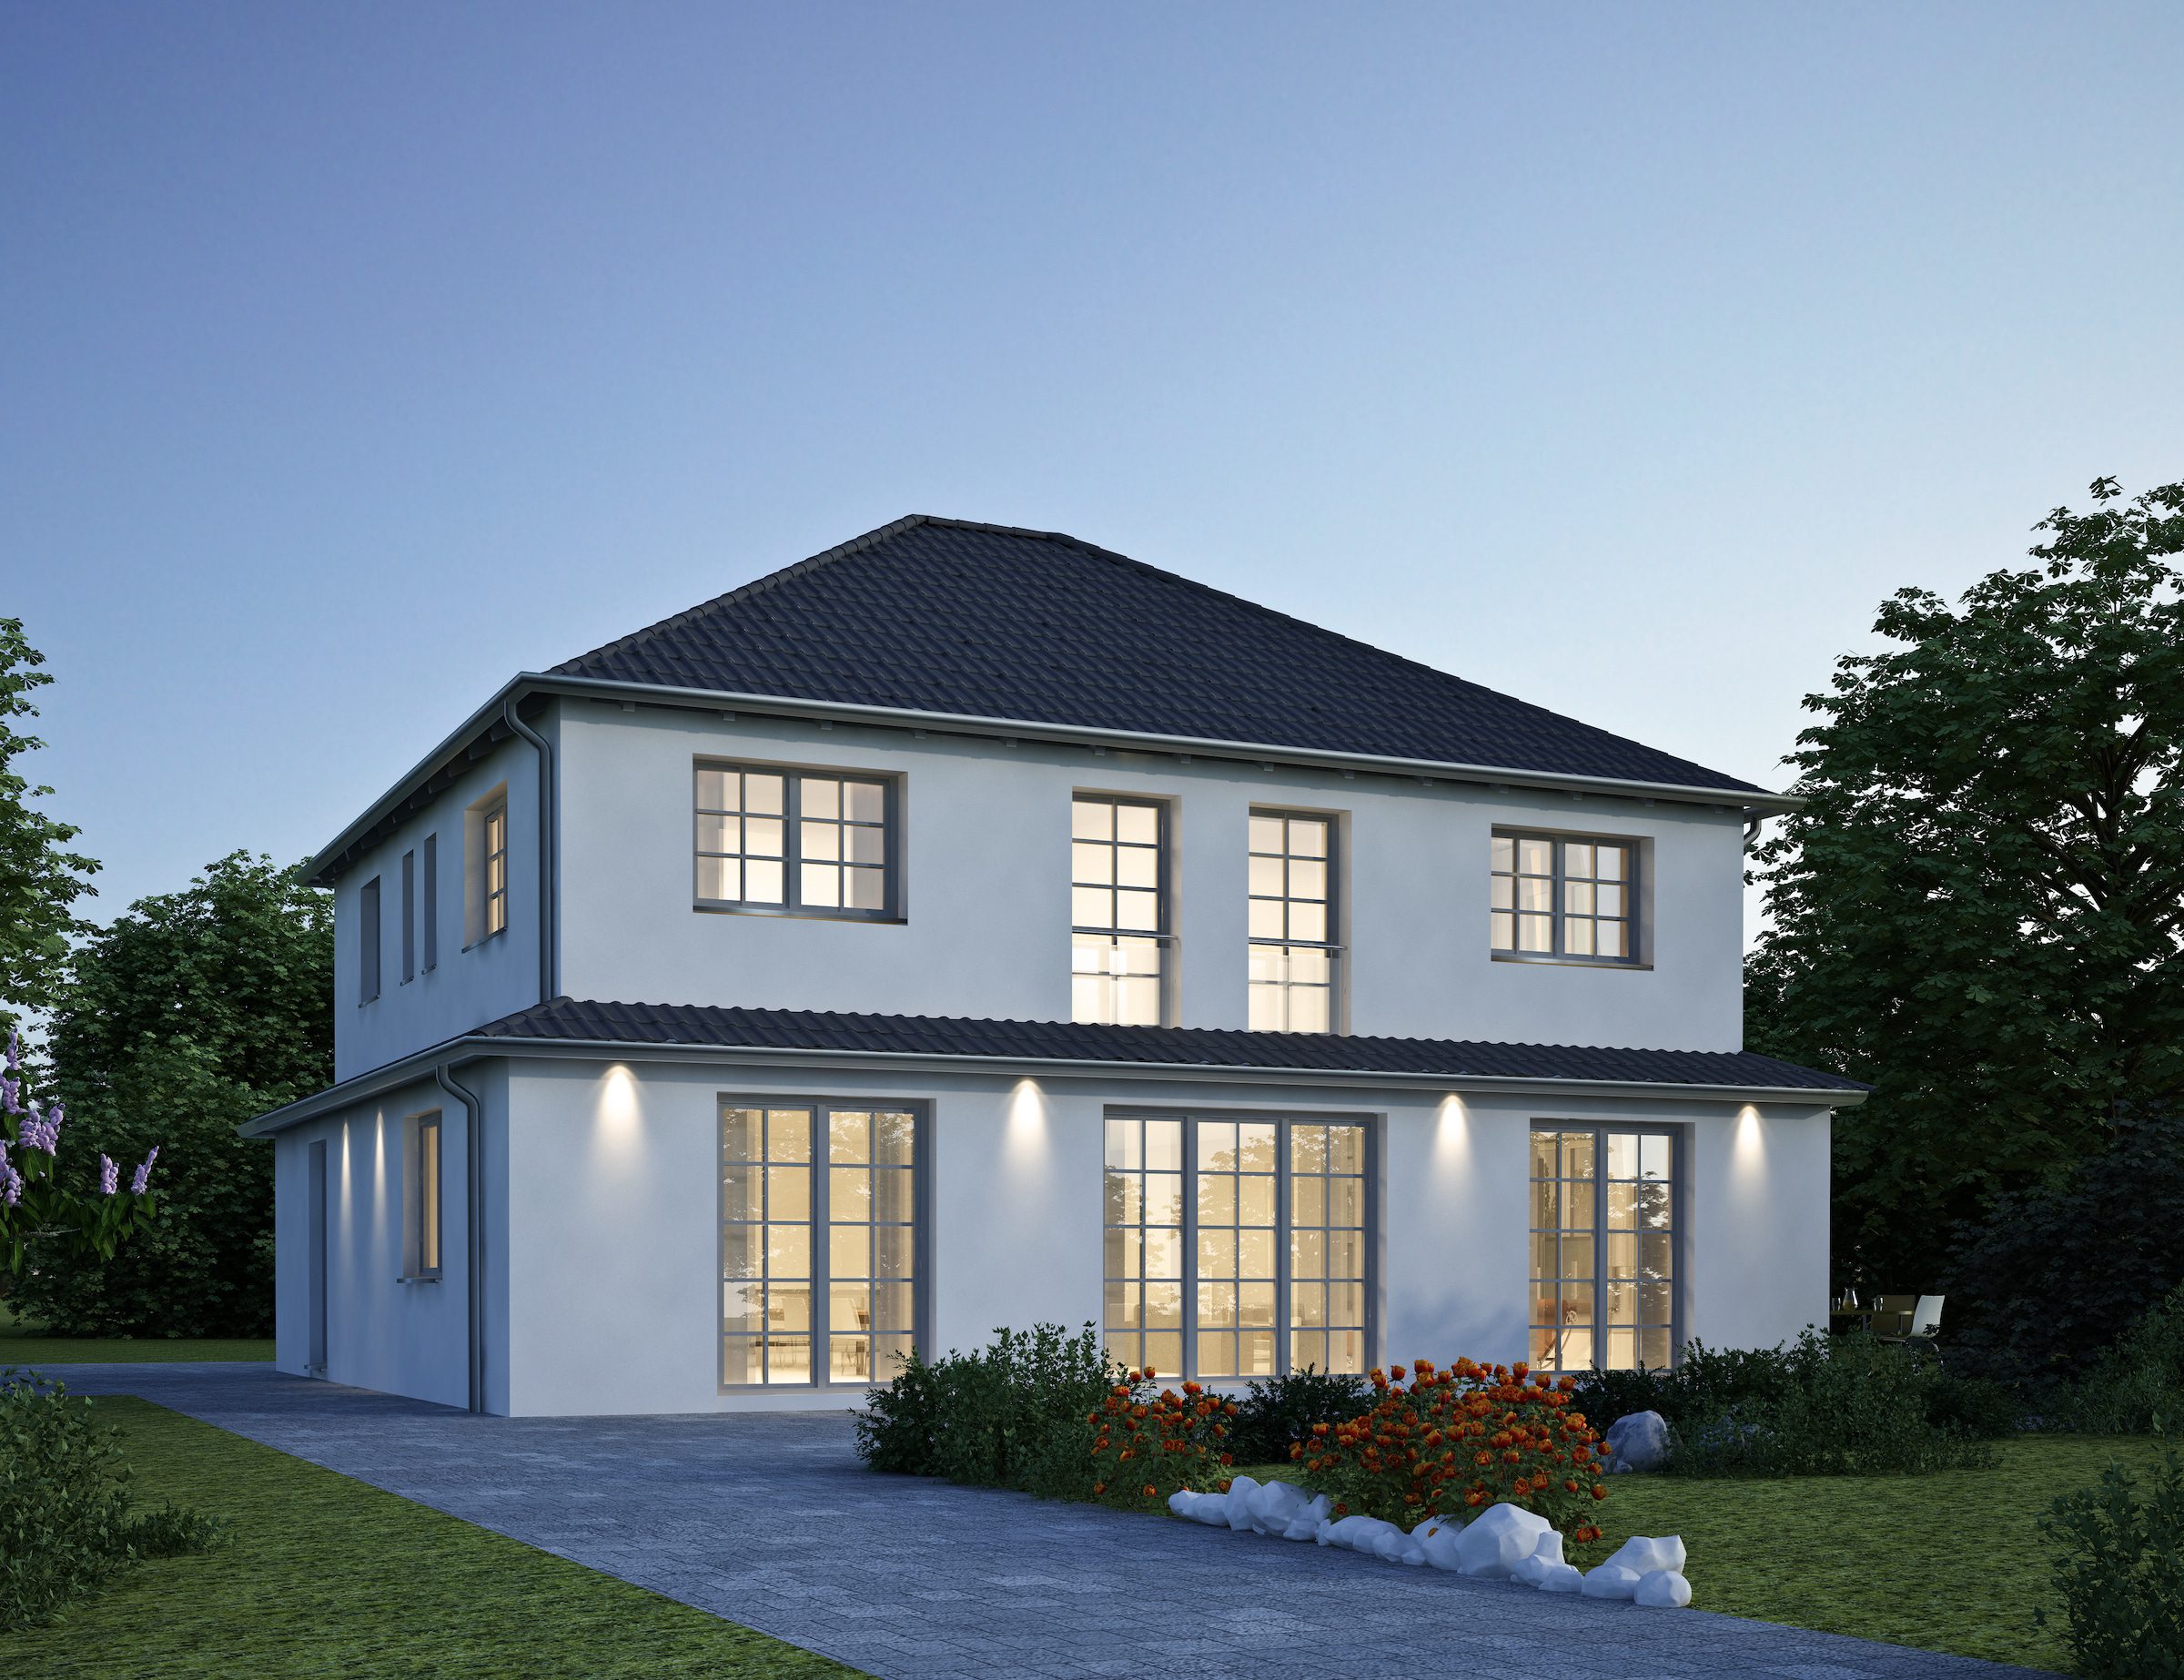 reynaers sl 38 windows in an architectural illustration of a modern house